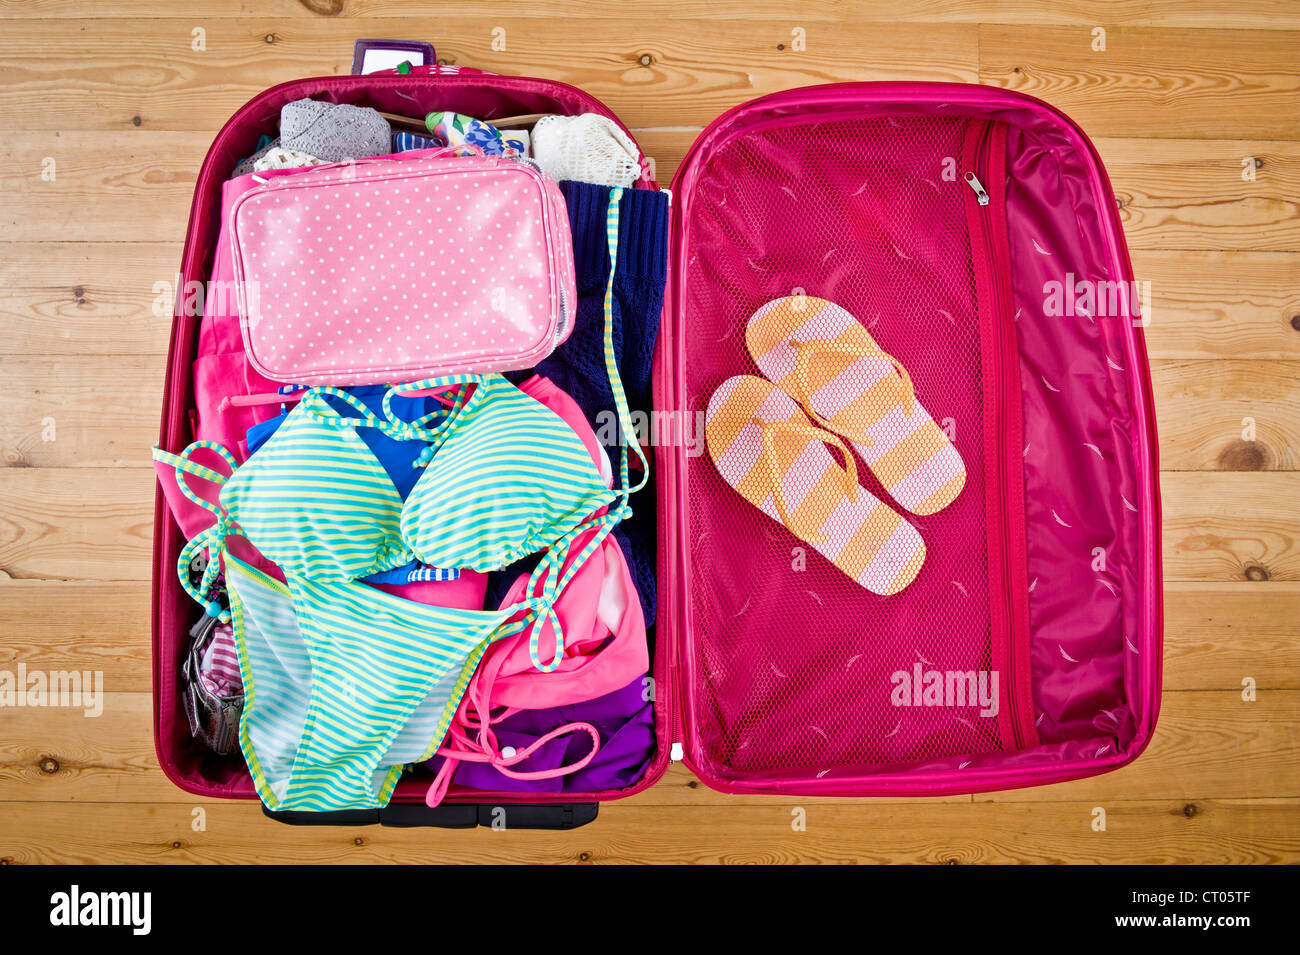 Open pink suitcase packed with bikinis and flip flops ready for a holiday in the sun Stock Photo